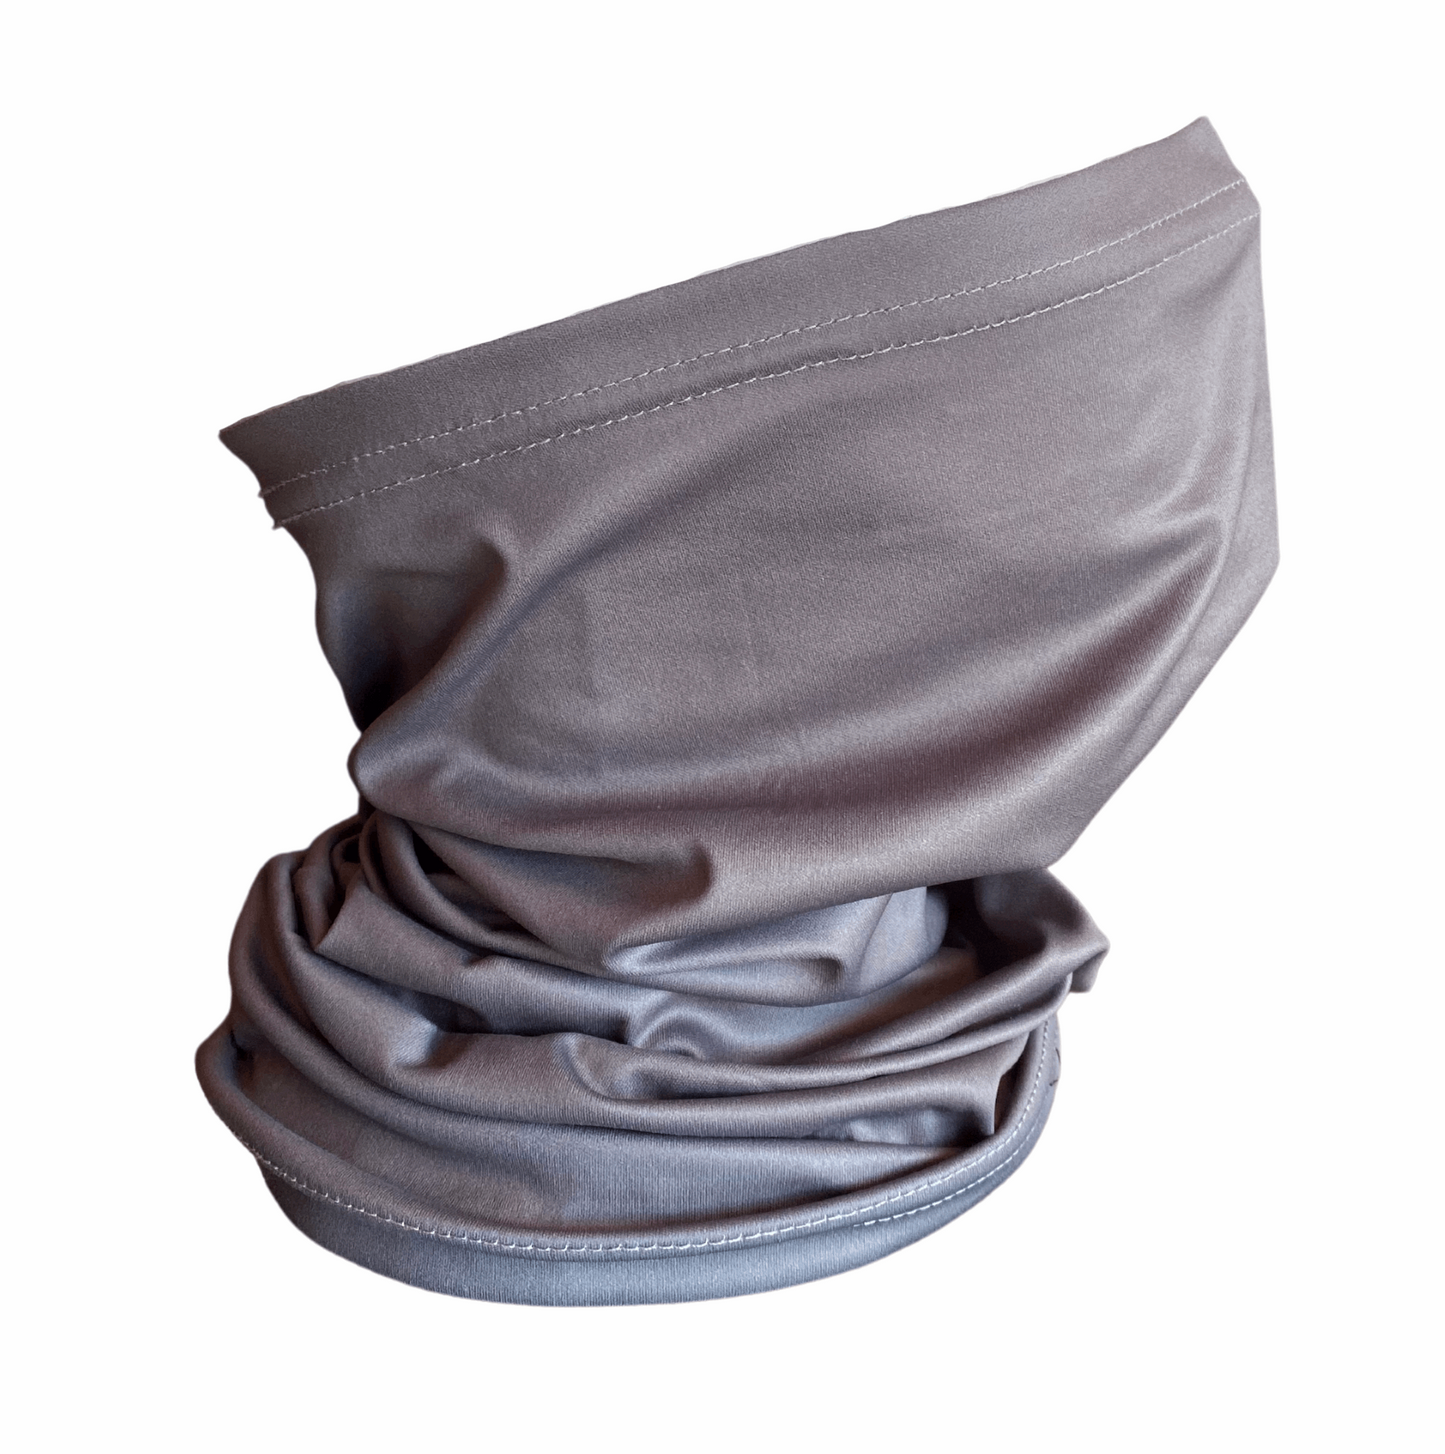 Safety Snood Neck Gaiter with Silver Nano technology - Grey